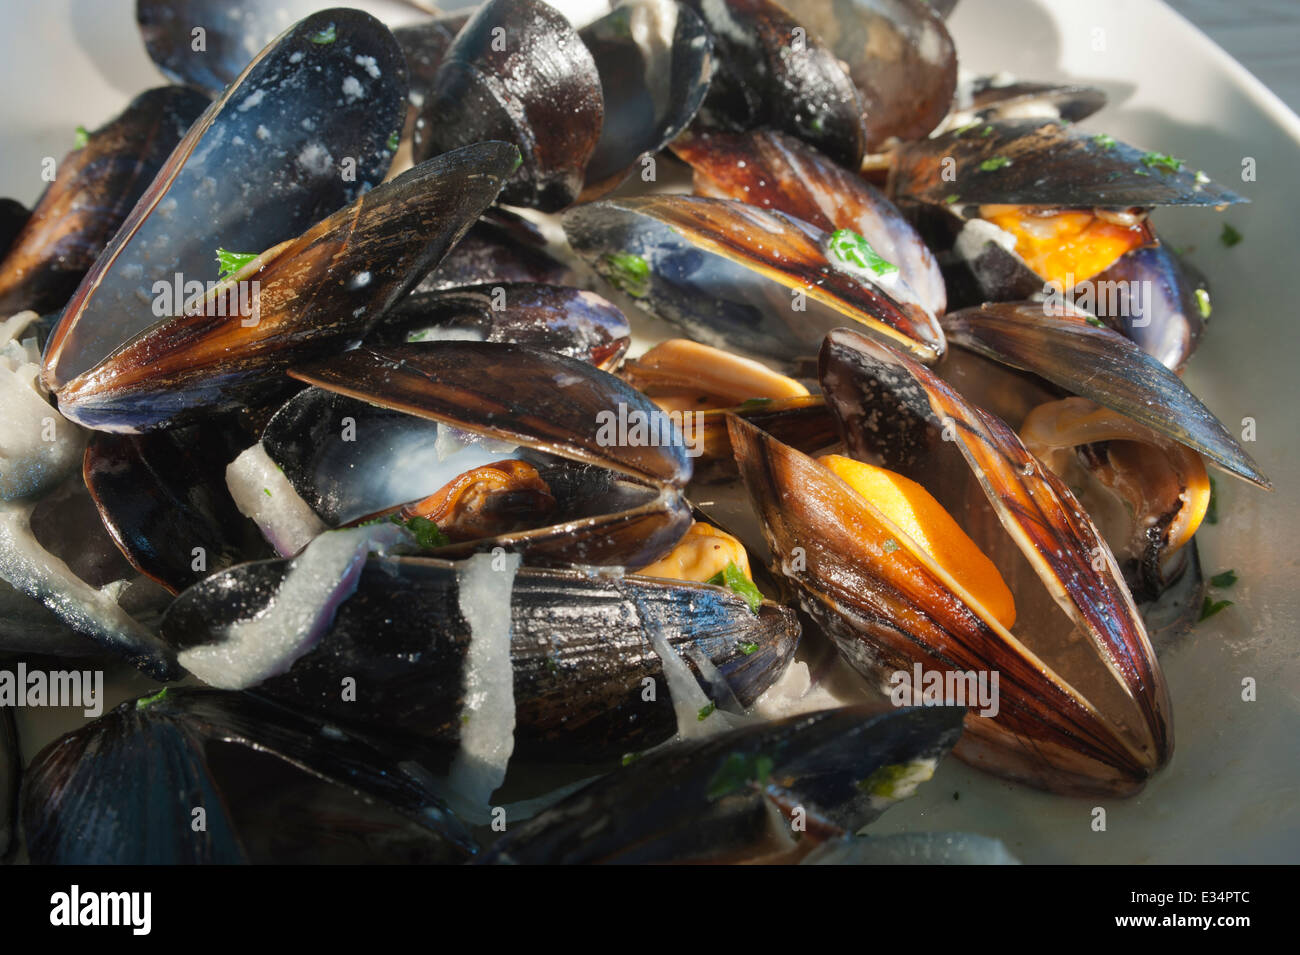 Moules or Mussels cooked in white wine with parsley. Stock Photo